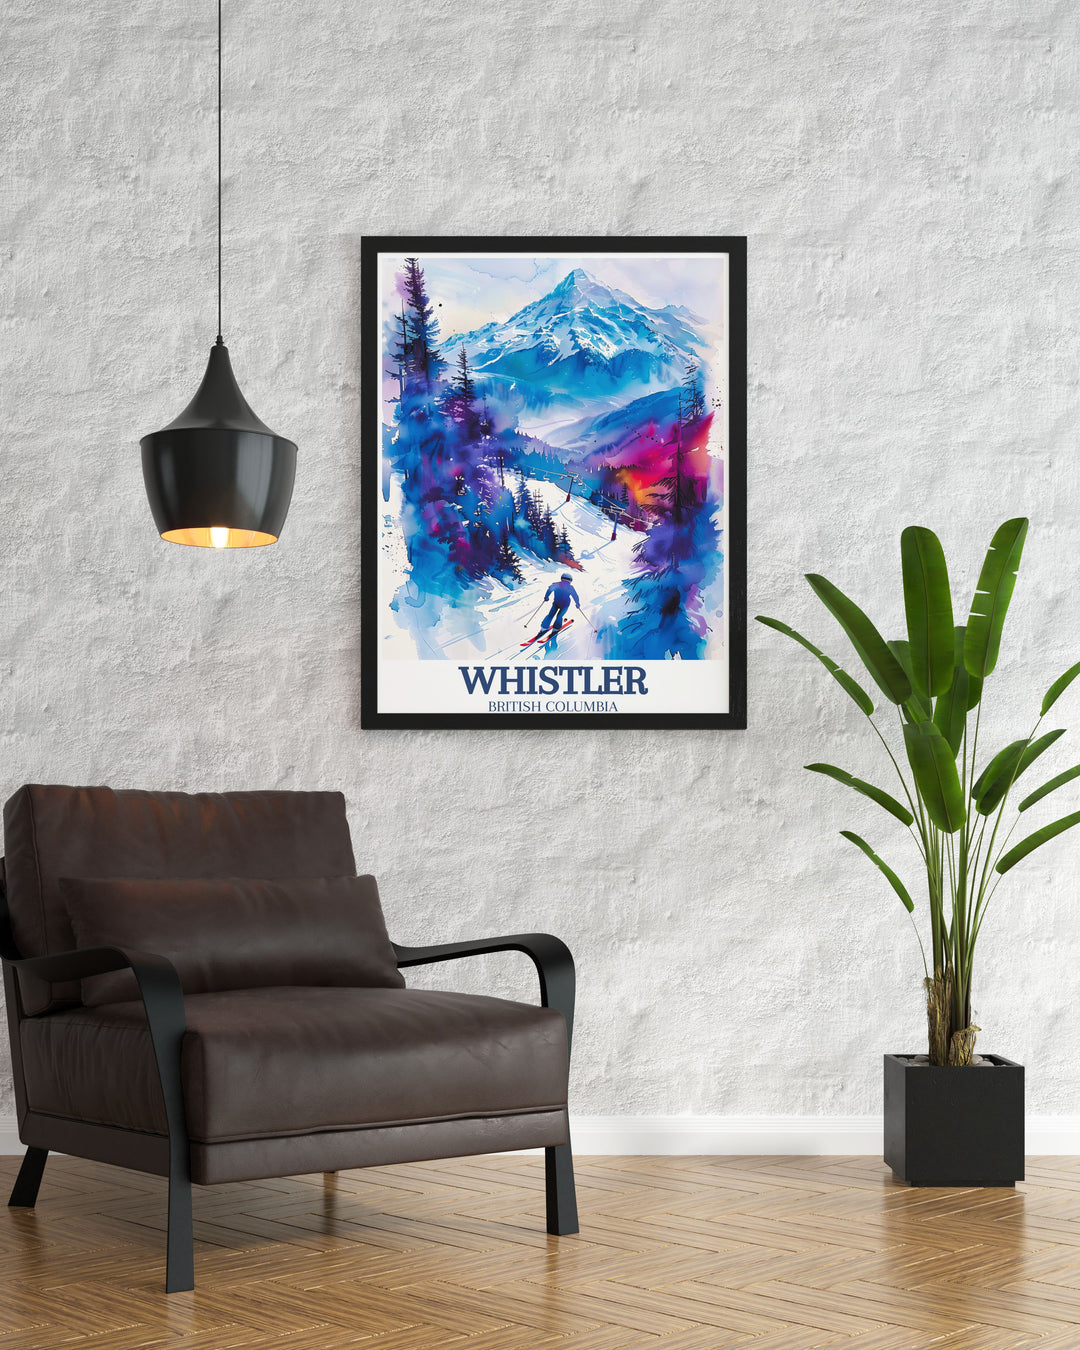 Whistler wall art featuring the thrill of skiing and the tranquility of the Coast Mountains making it a beautiful addition to any room and evoking memories of snowy adventures